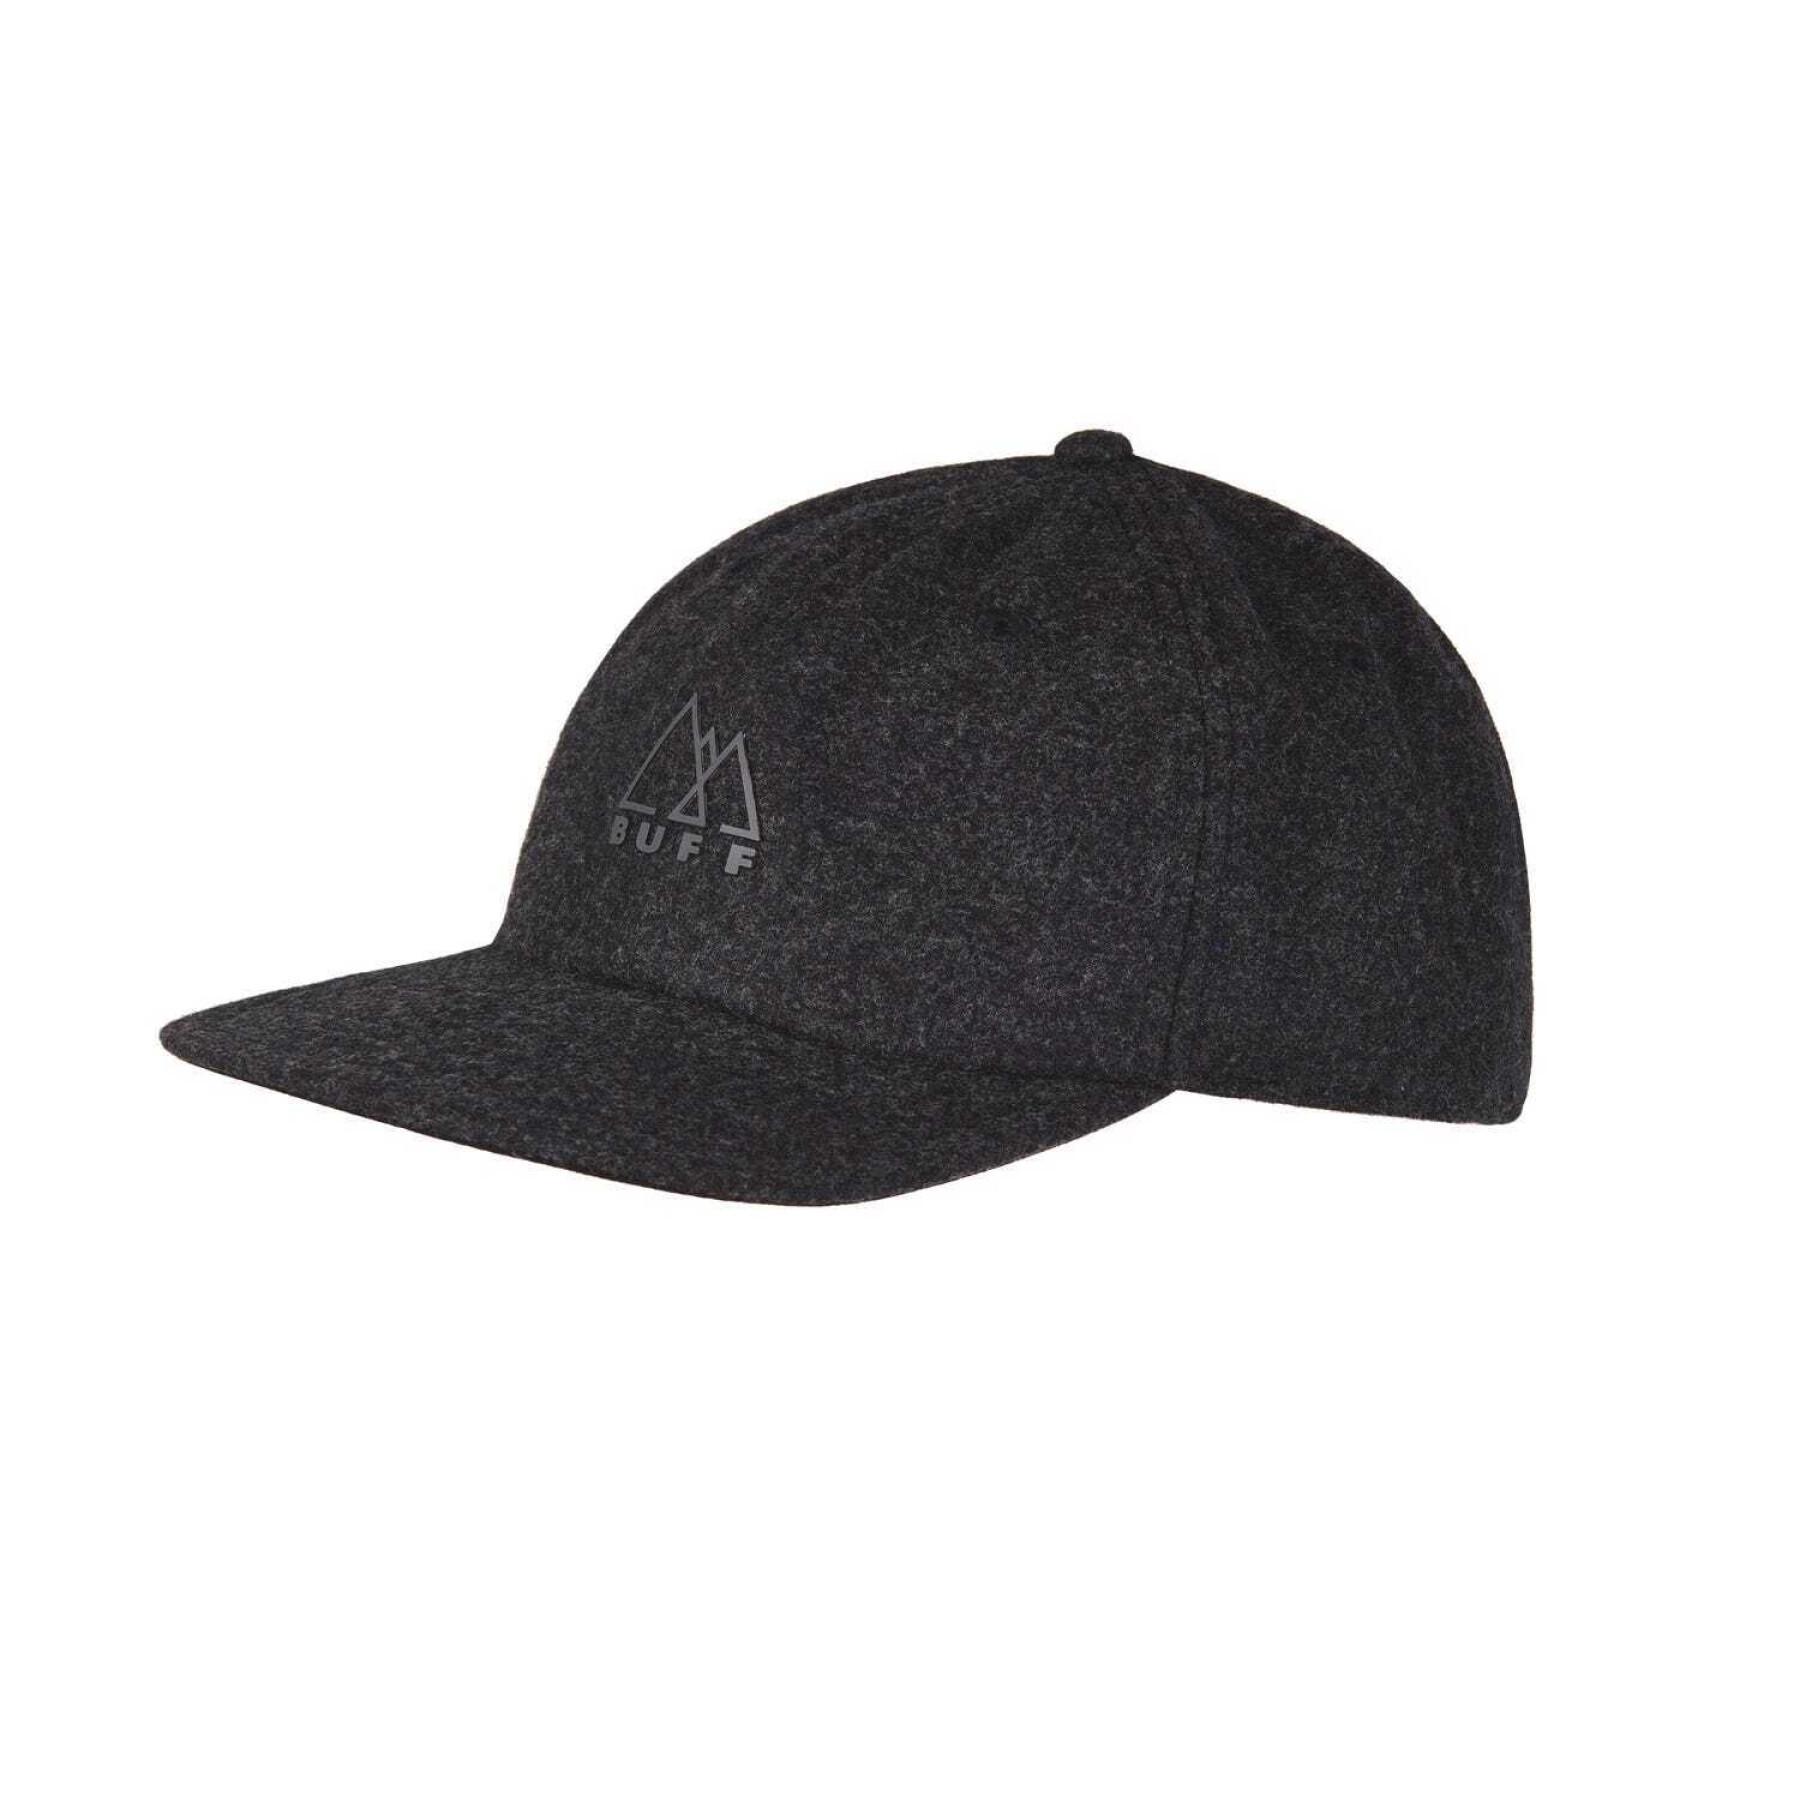 Baseball cap in paque Buff Solid